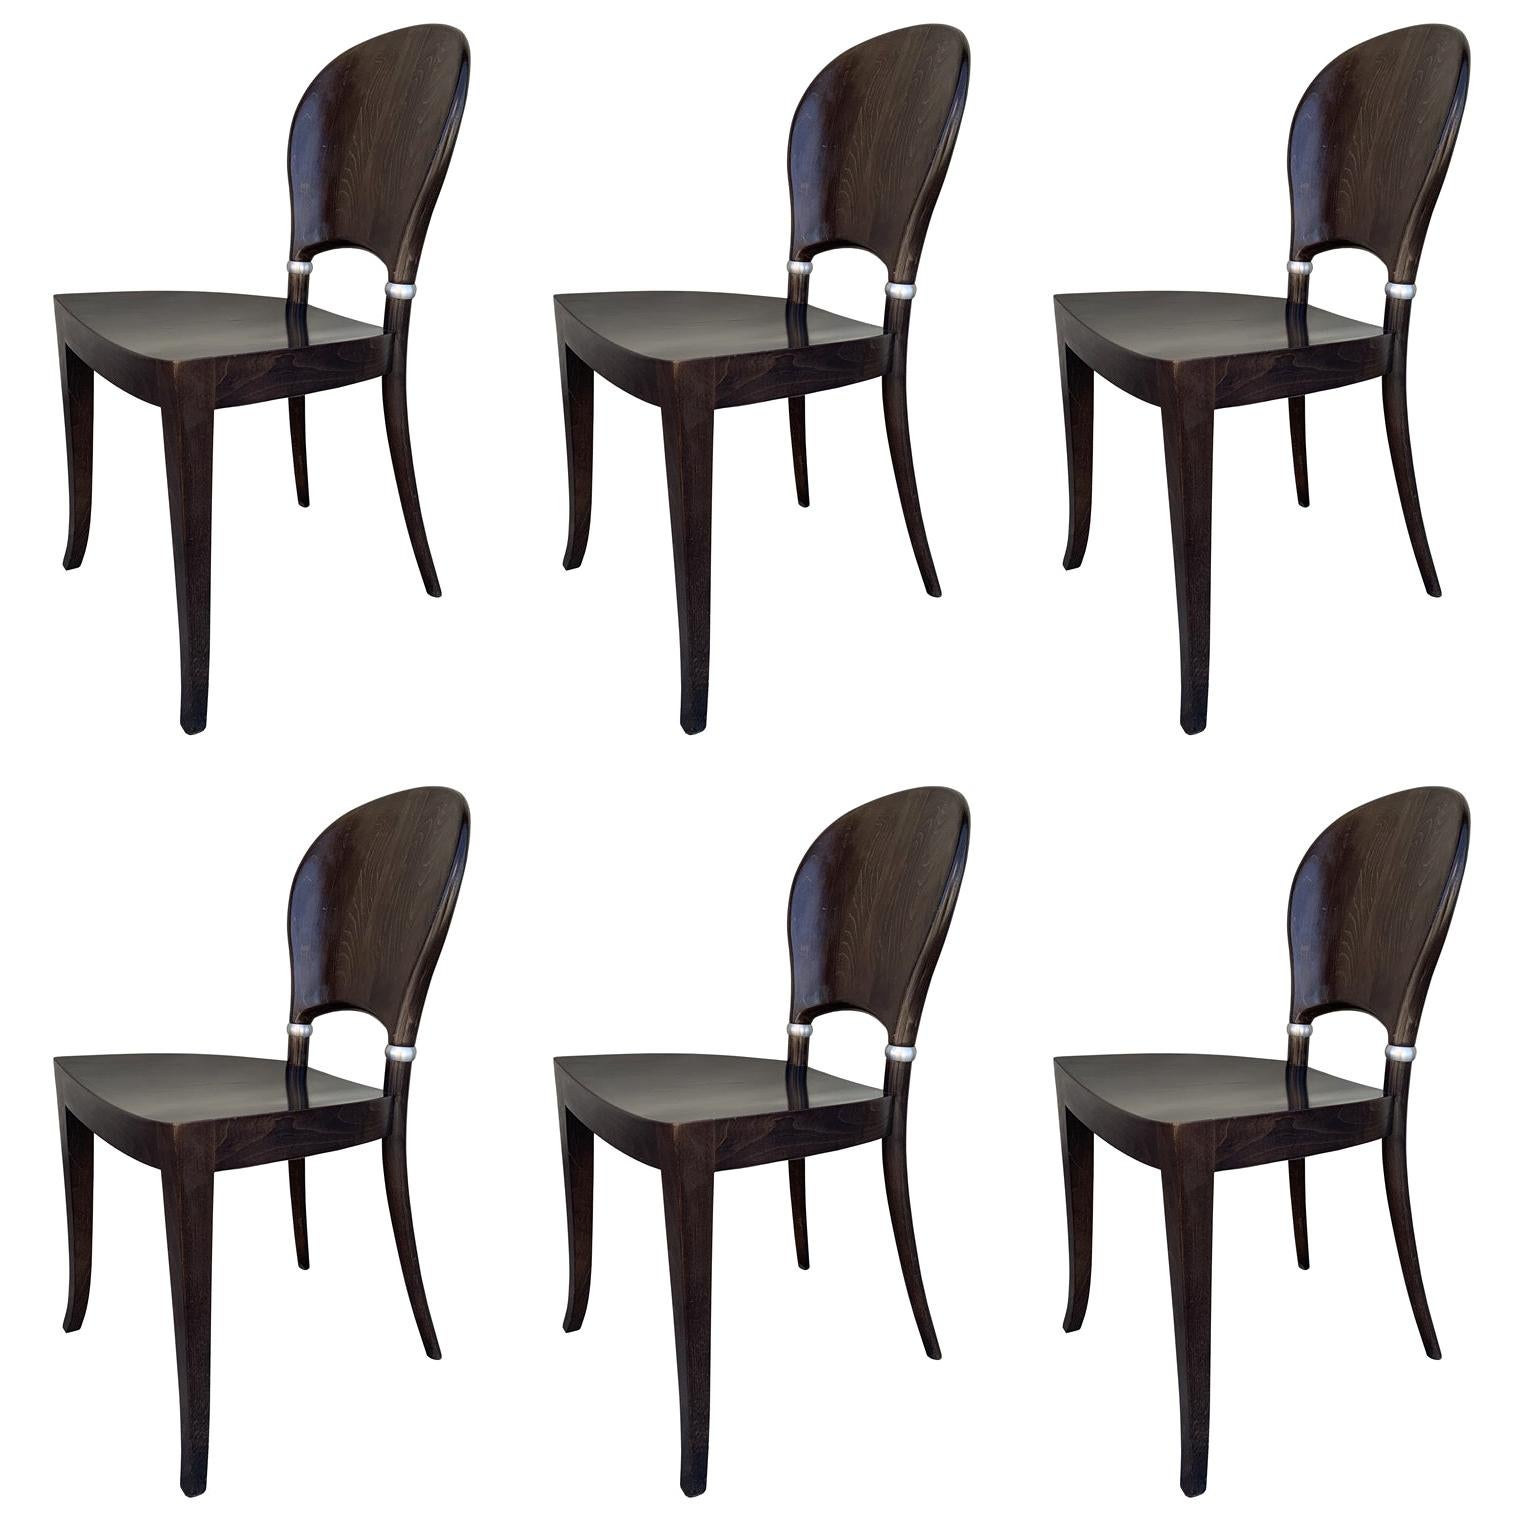 Set of Six Dining Chairs Made in Italy Bu Potocco, Italy